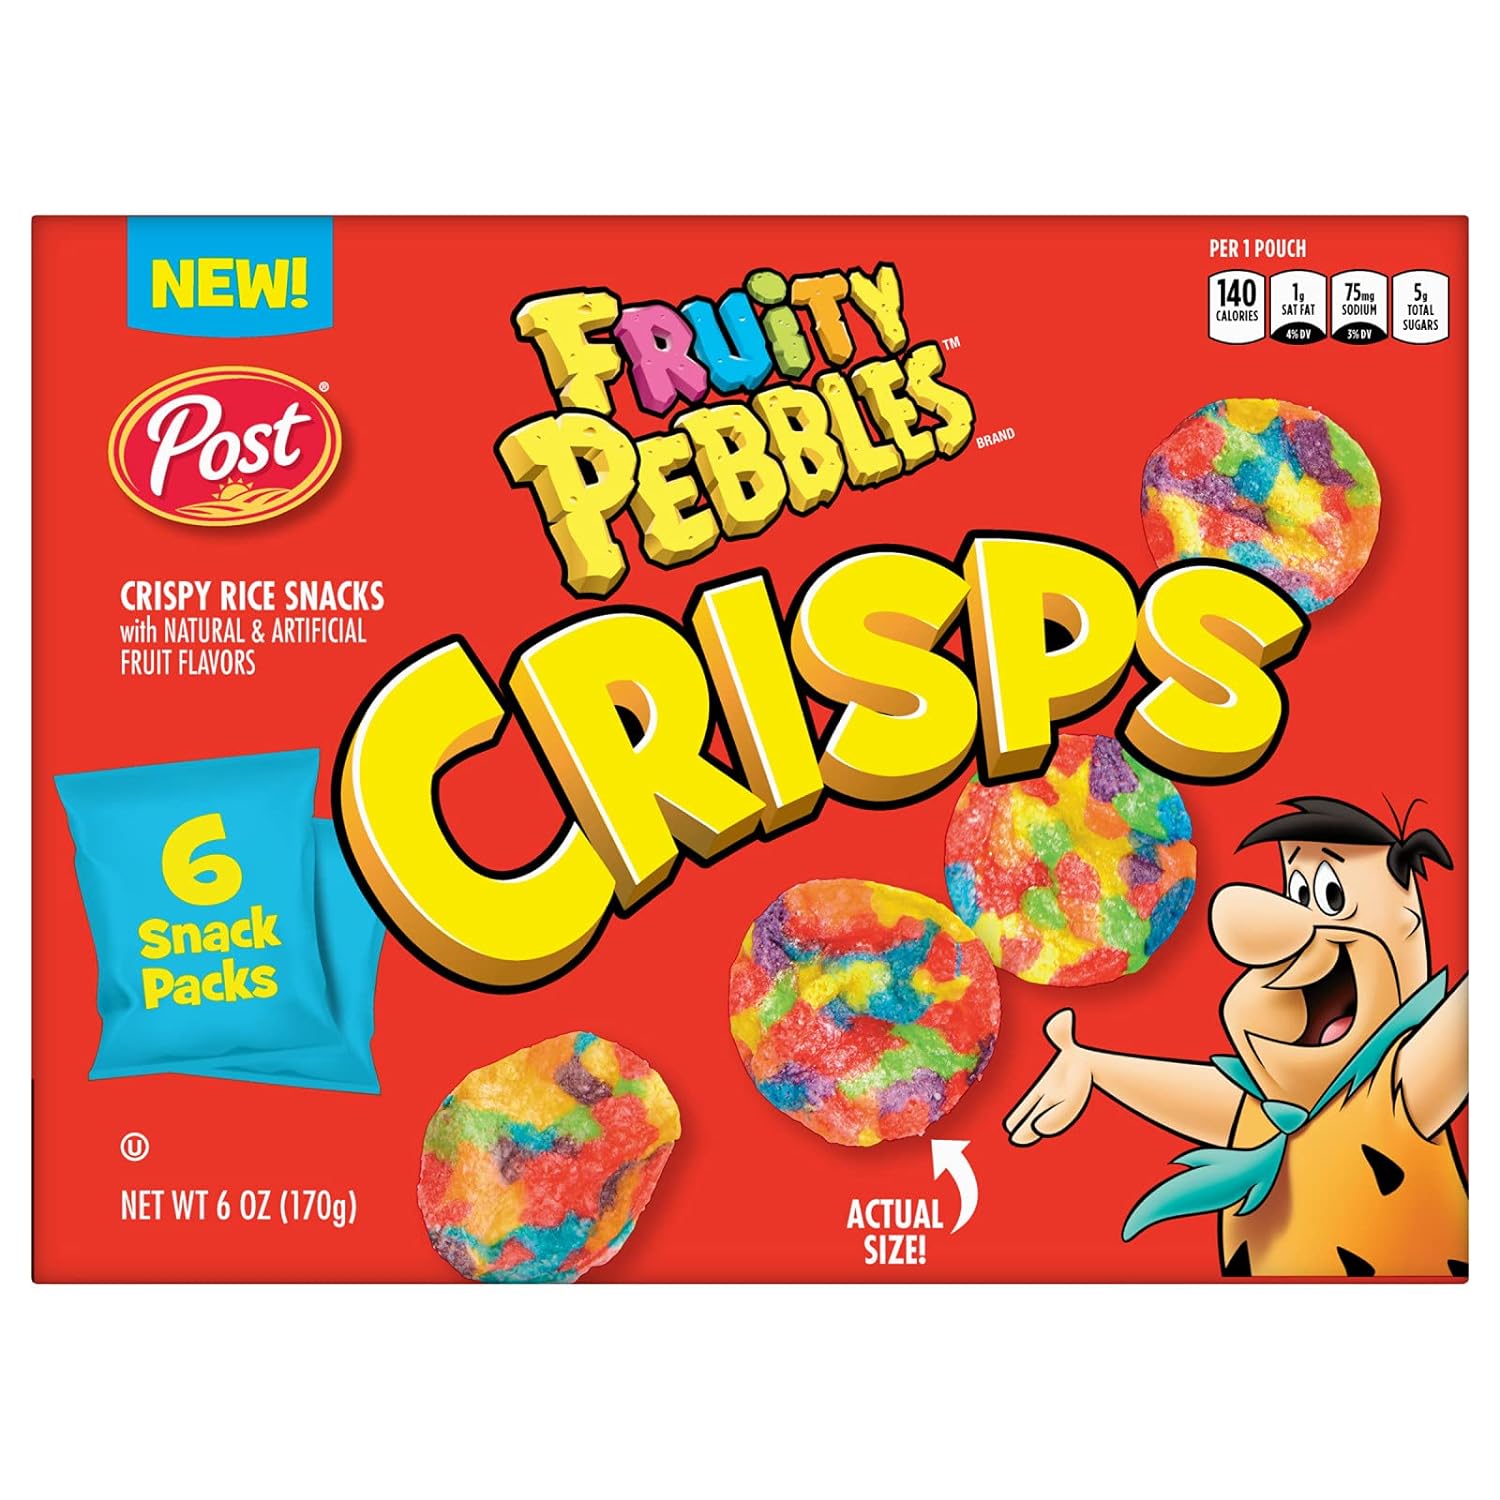 New Post Fruity PEBBLES Crisps, Portable Cereal Snack for Kids and Families, Gluten Free, 3 Count (Pack of 1)